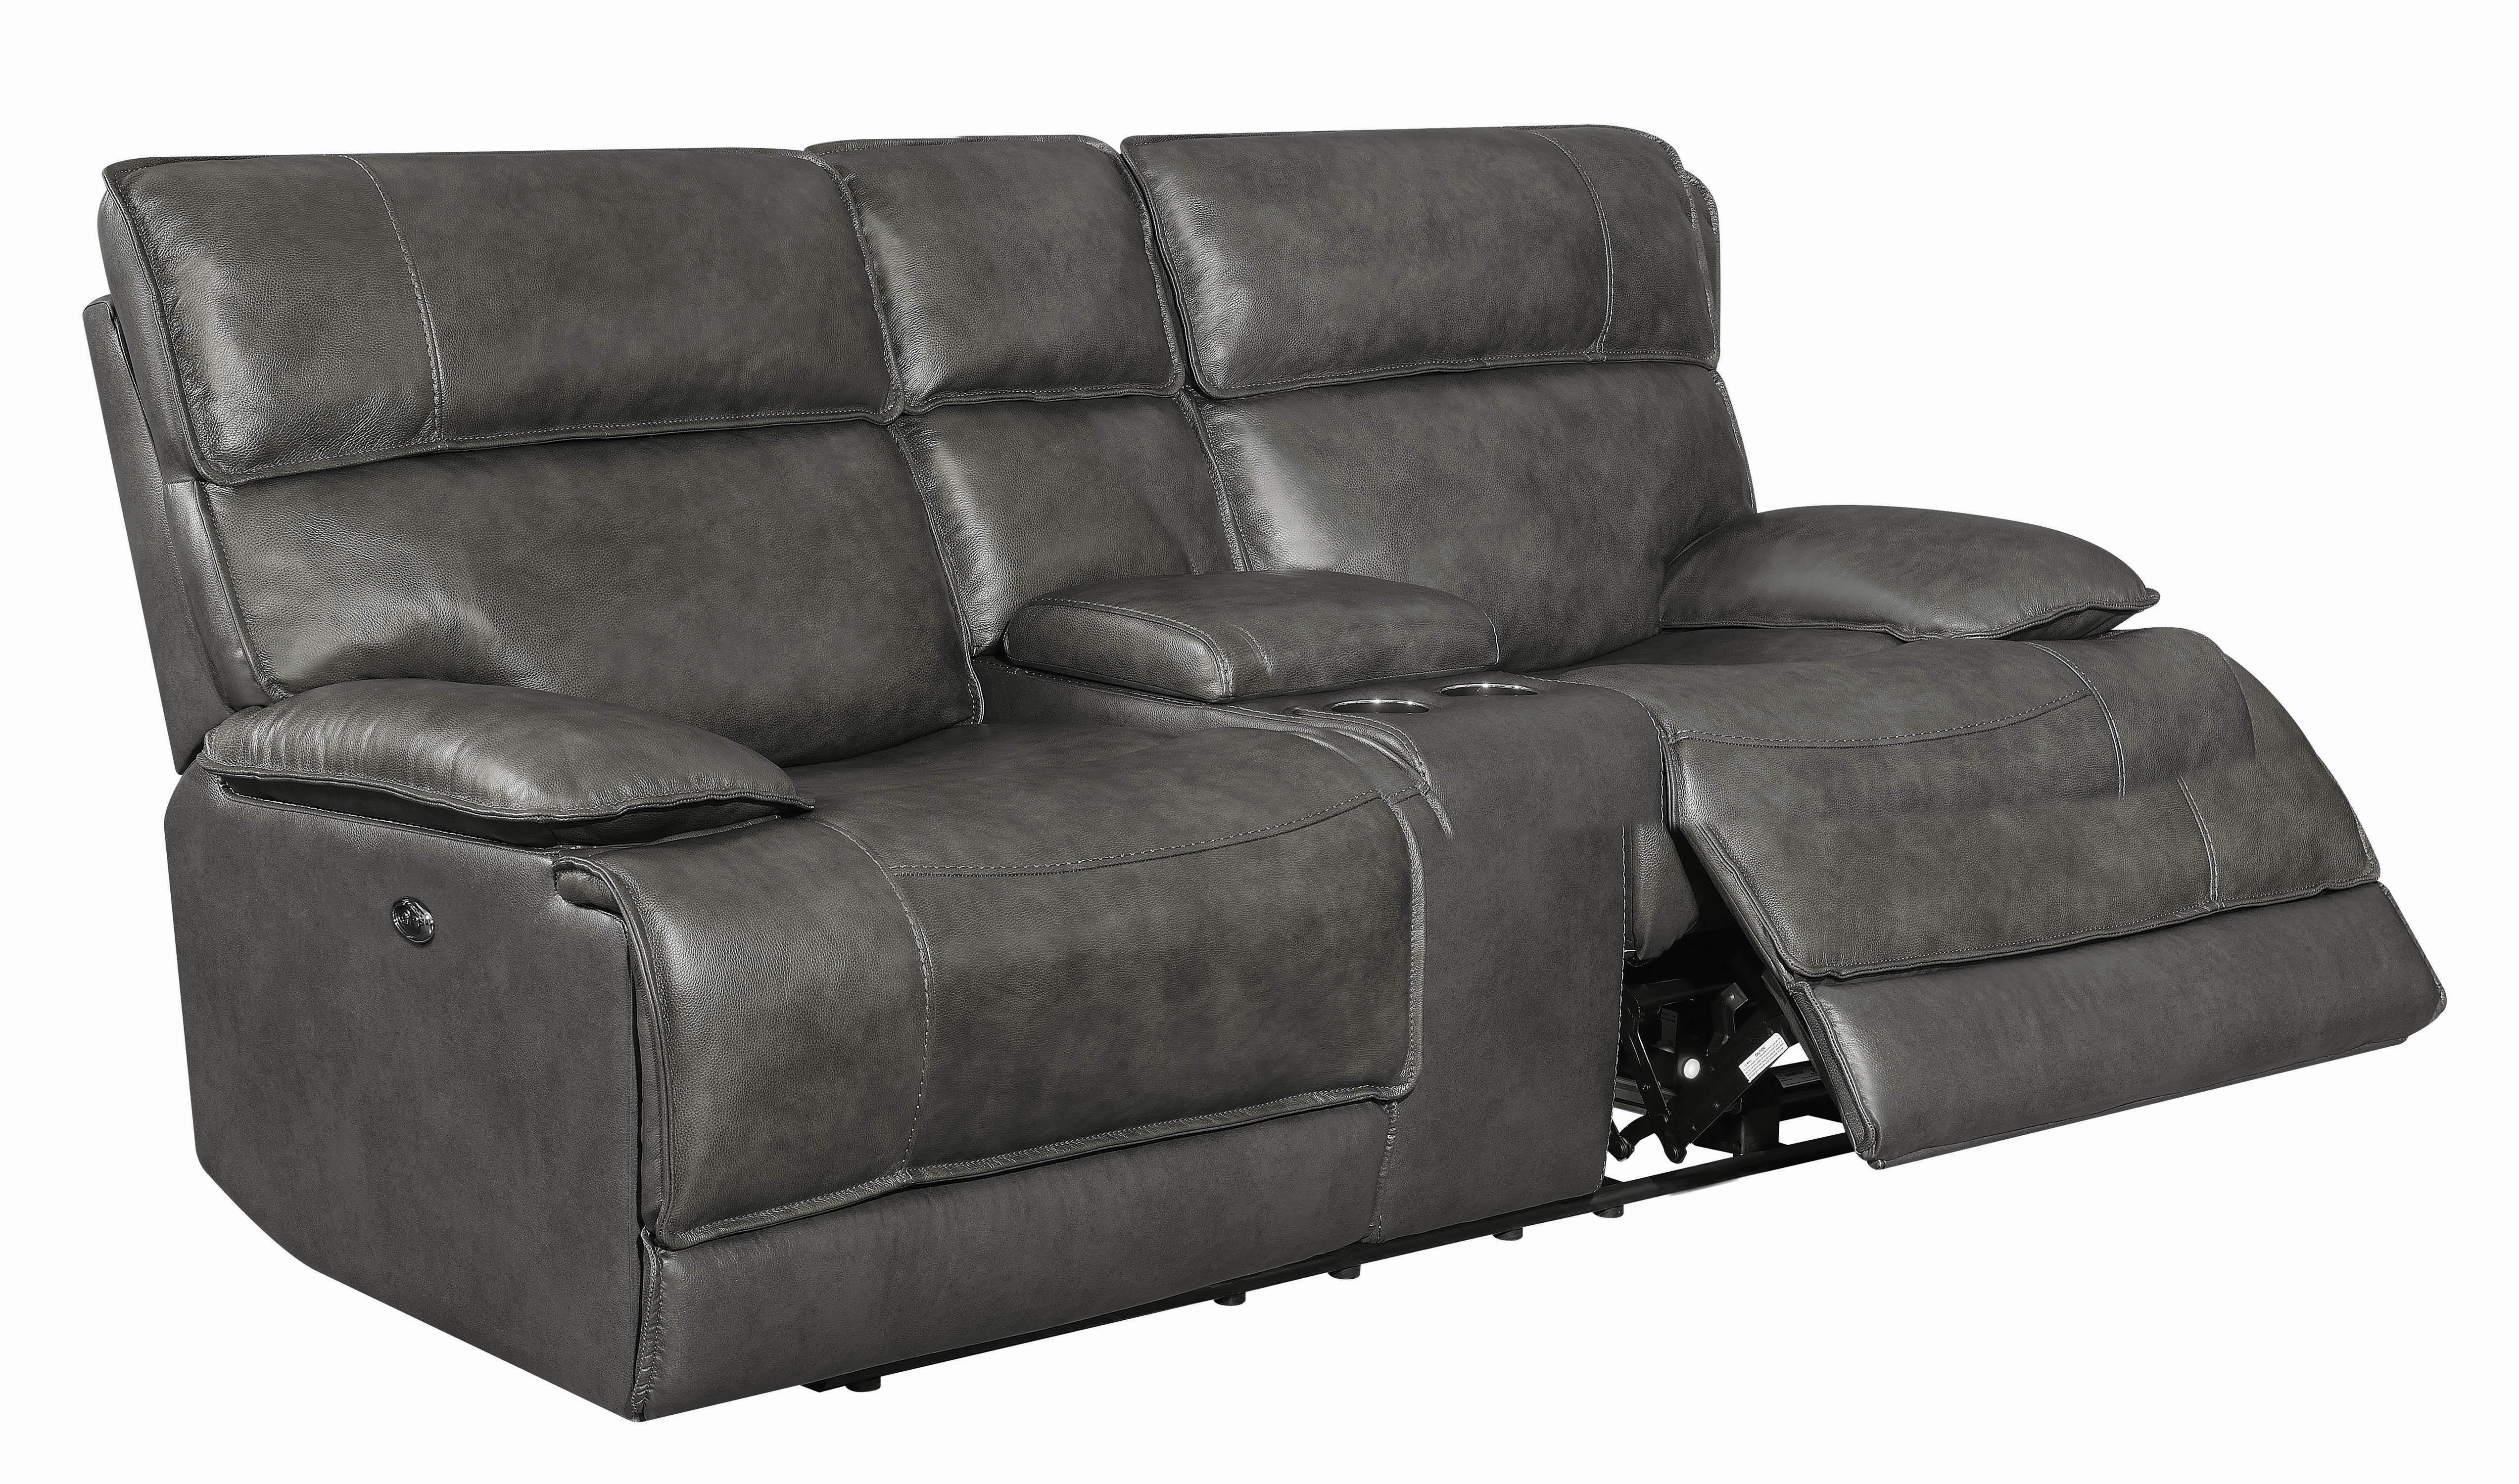 

    
650222PP Modern Gray Leather Upholstery Power2 loveseat by Coaster
